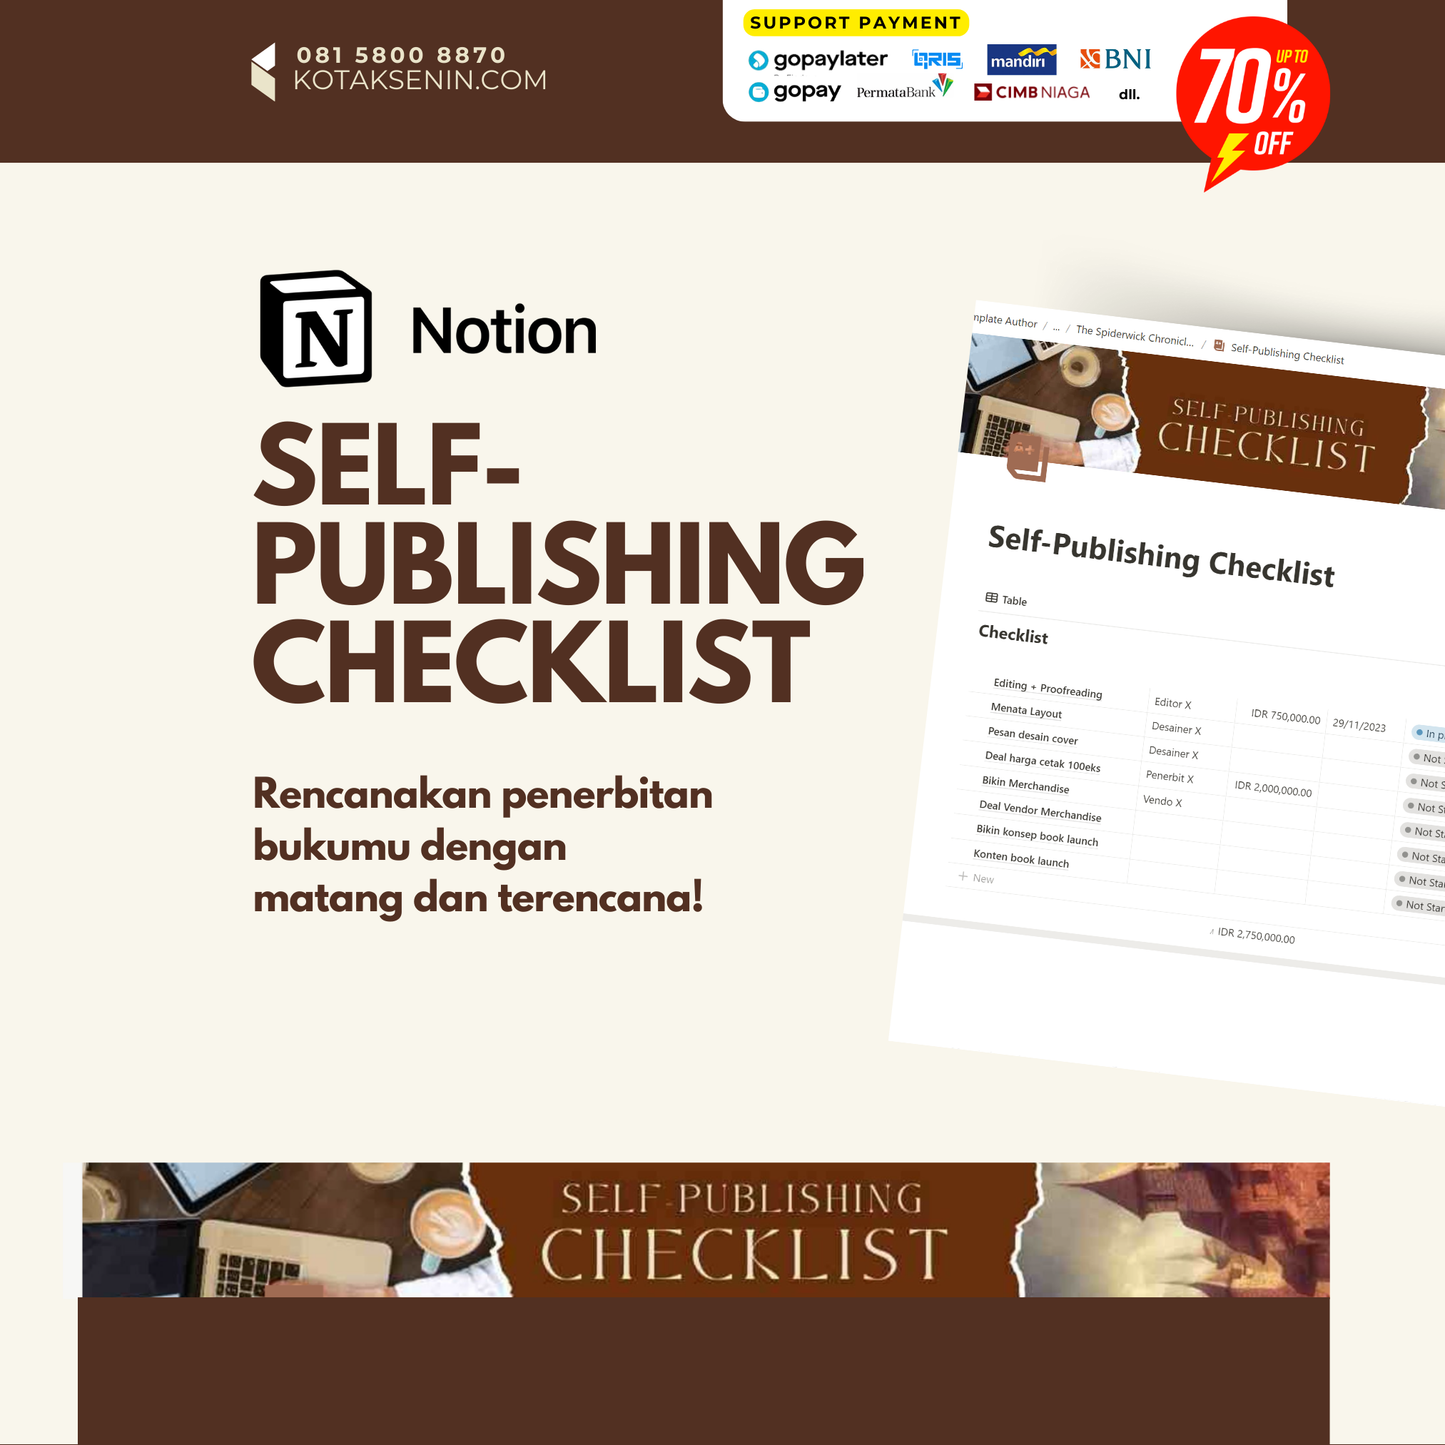 Novel Planner PRO + Marketing Tools for Author 2024